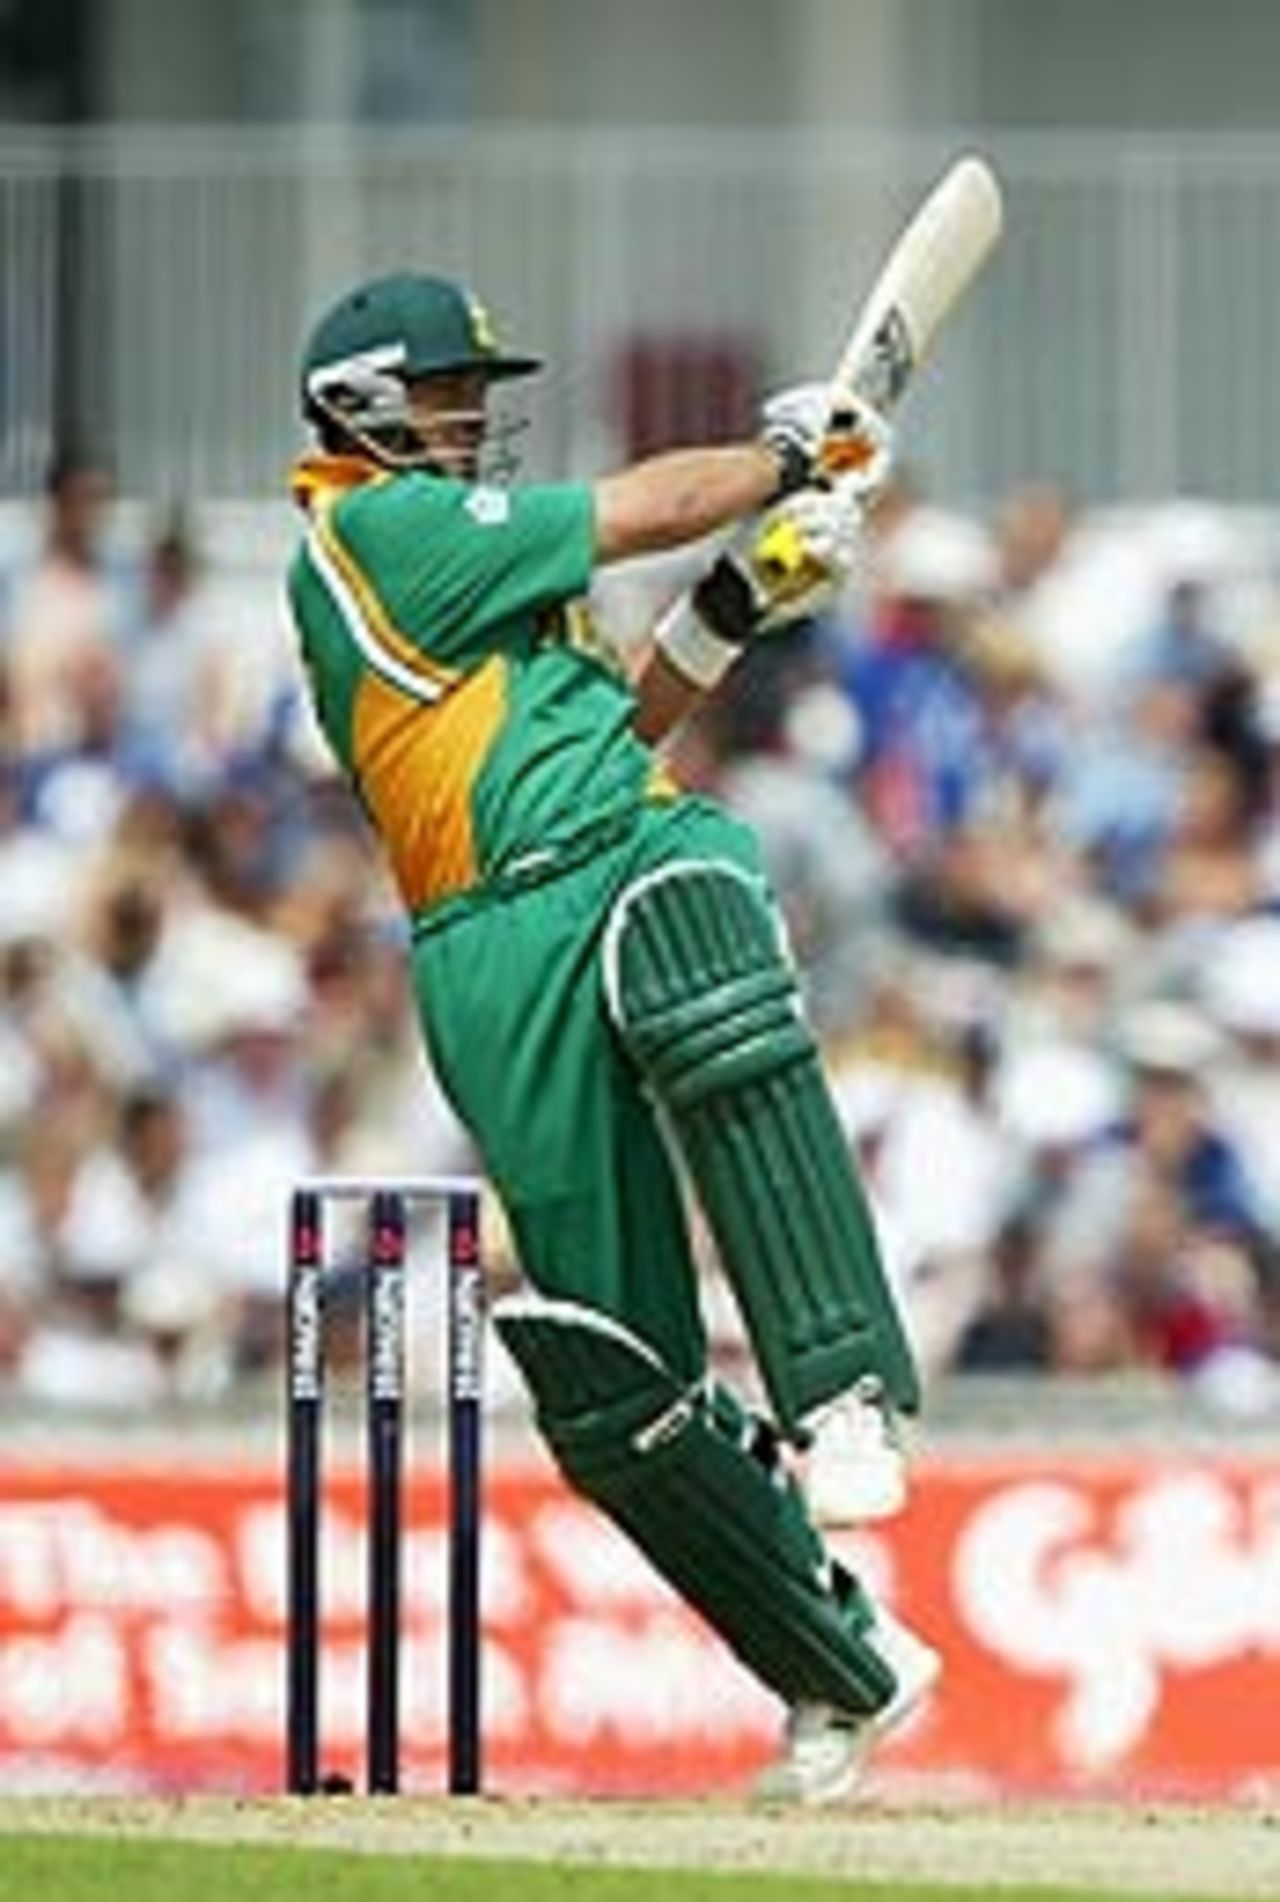 Jacques Kallis hooks on his way to 107, England v South Africa, The Oval, June 28, 2003